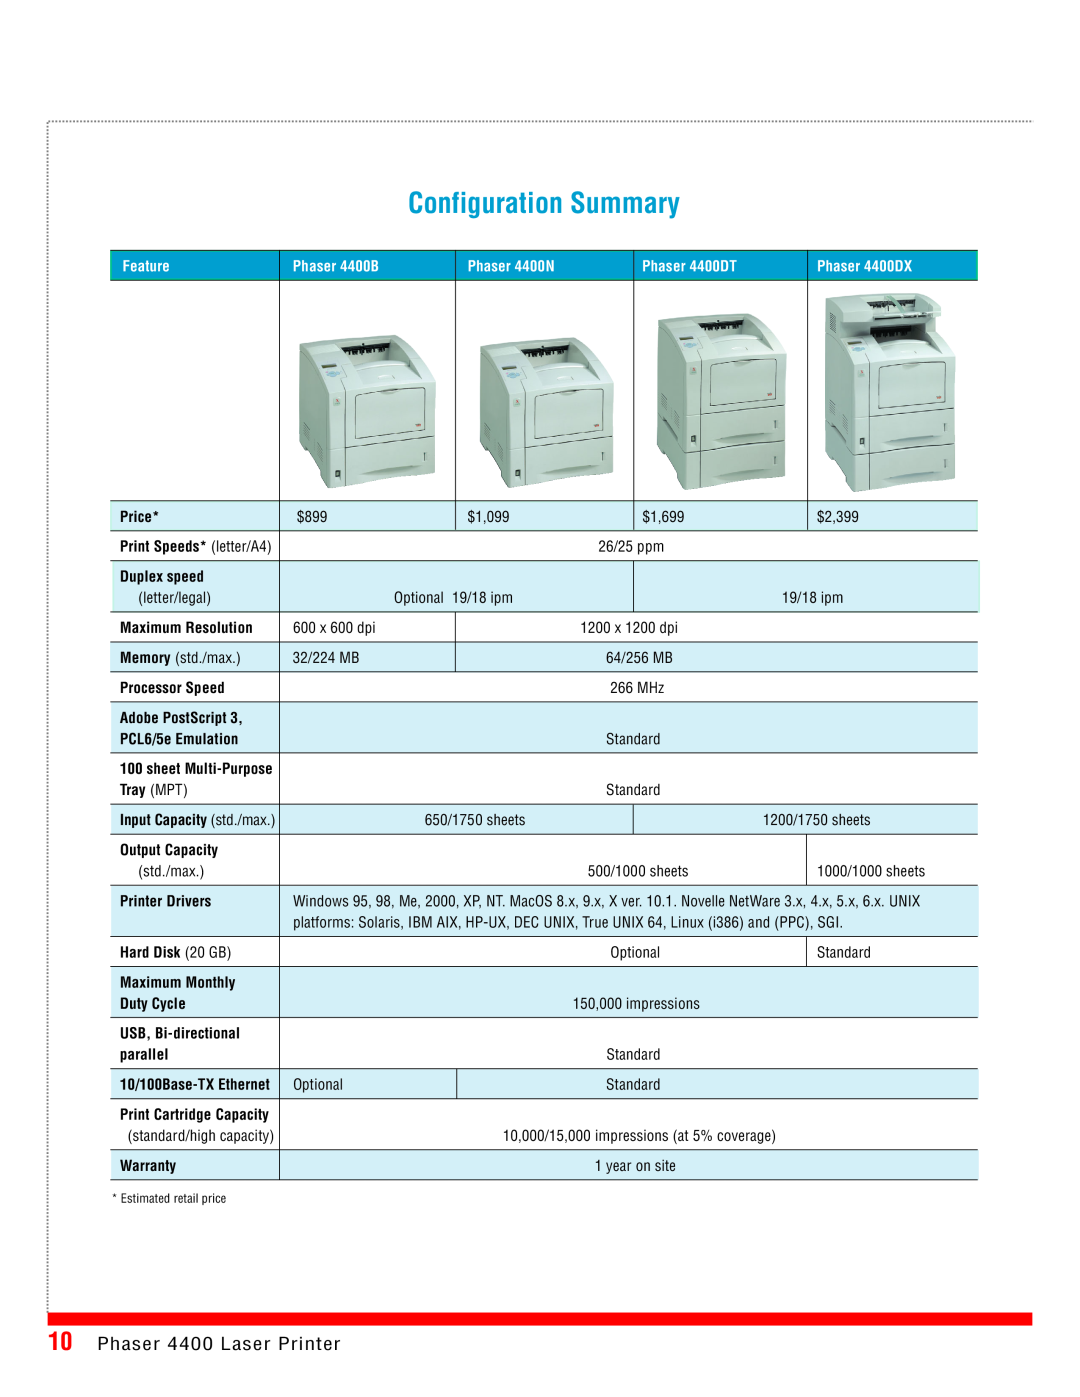 Xerox manual Configuration Summary, Phaser 4400 Laser Printer, Feature, Phaser 4400B, Phaser 4400N, Phaser 4400DT 